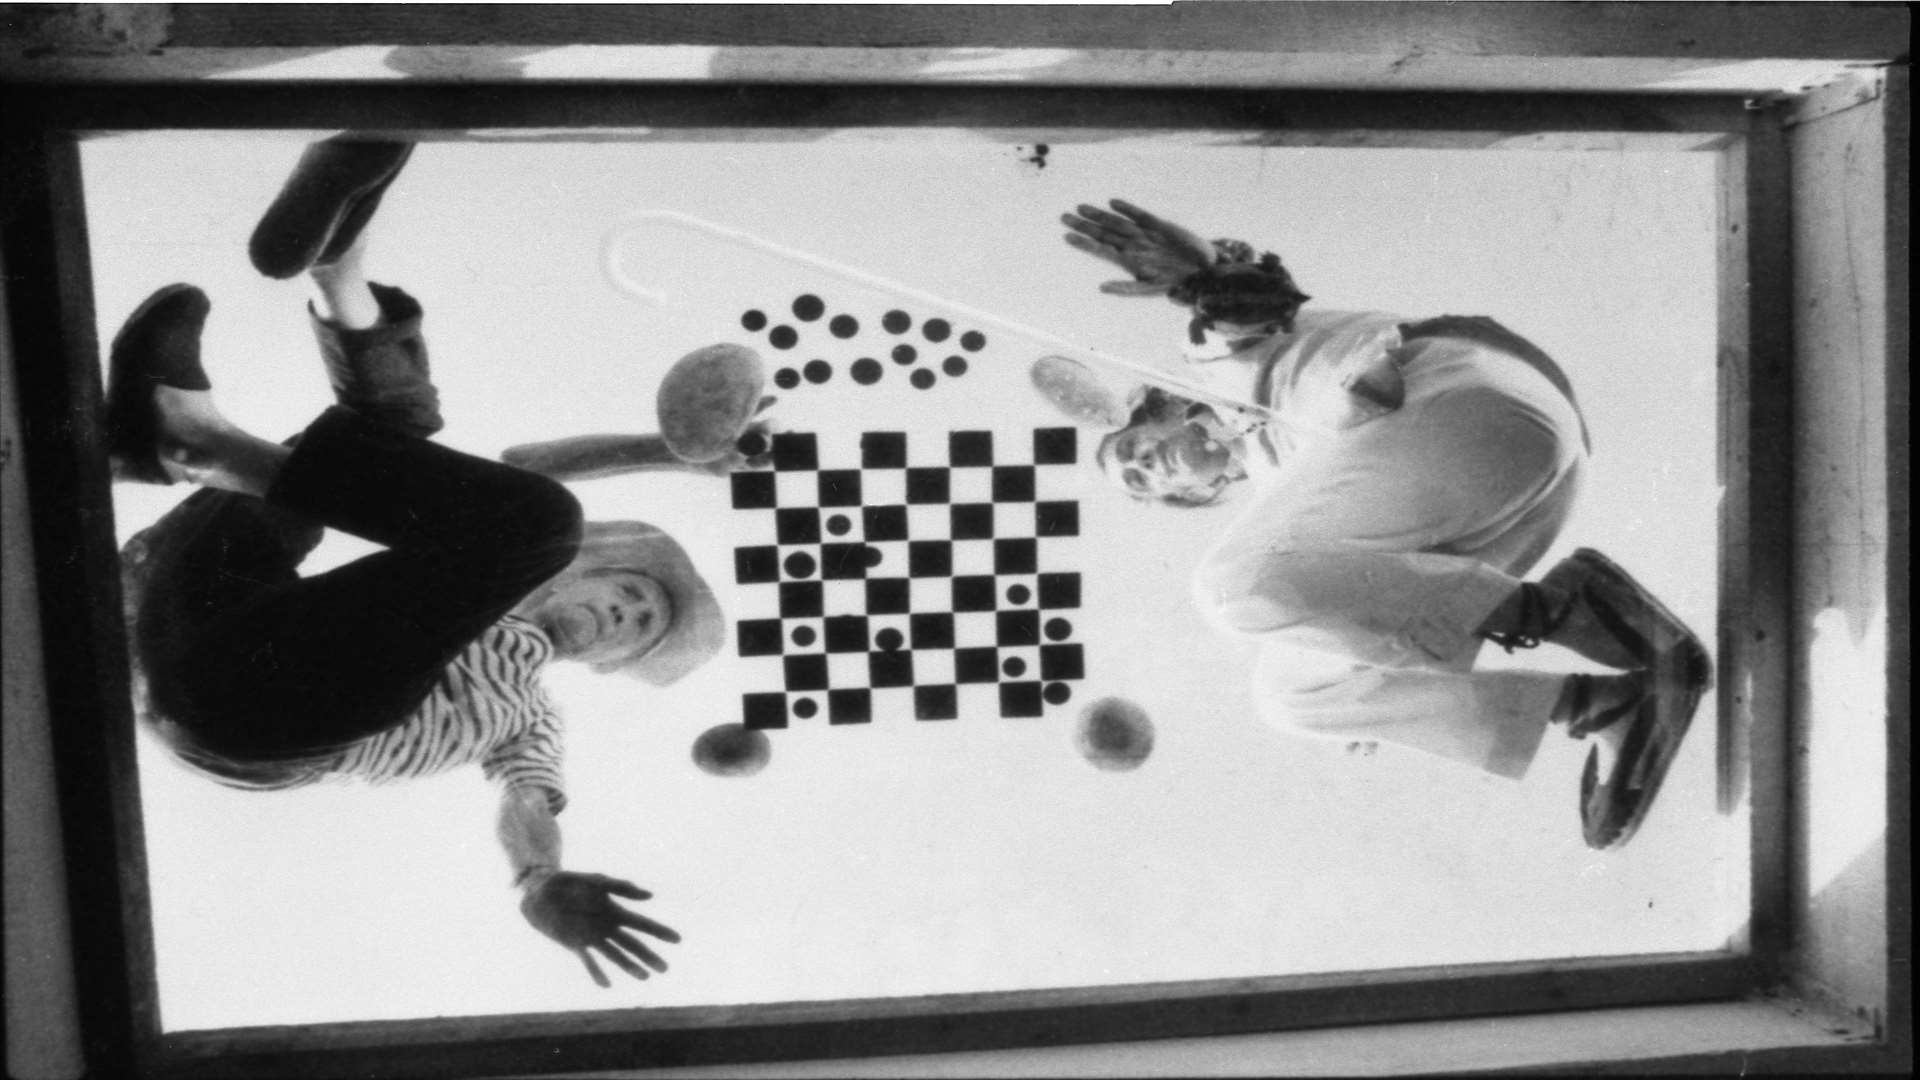 Robert Descharnes, Duchamp and Dali playing chess during filming for A Soft Self-Portrait, directed by Jean-Christophe Averty, 1966 - Dali/Cuchamp, Royal Academy of Arts